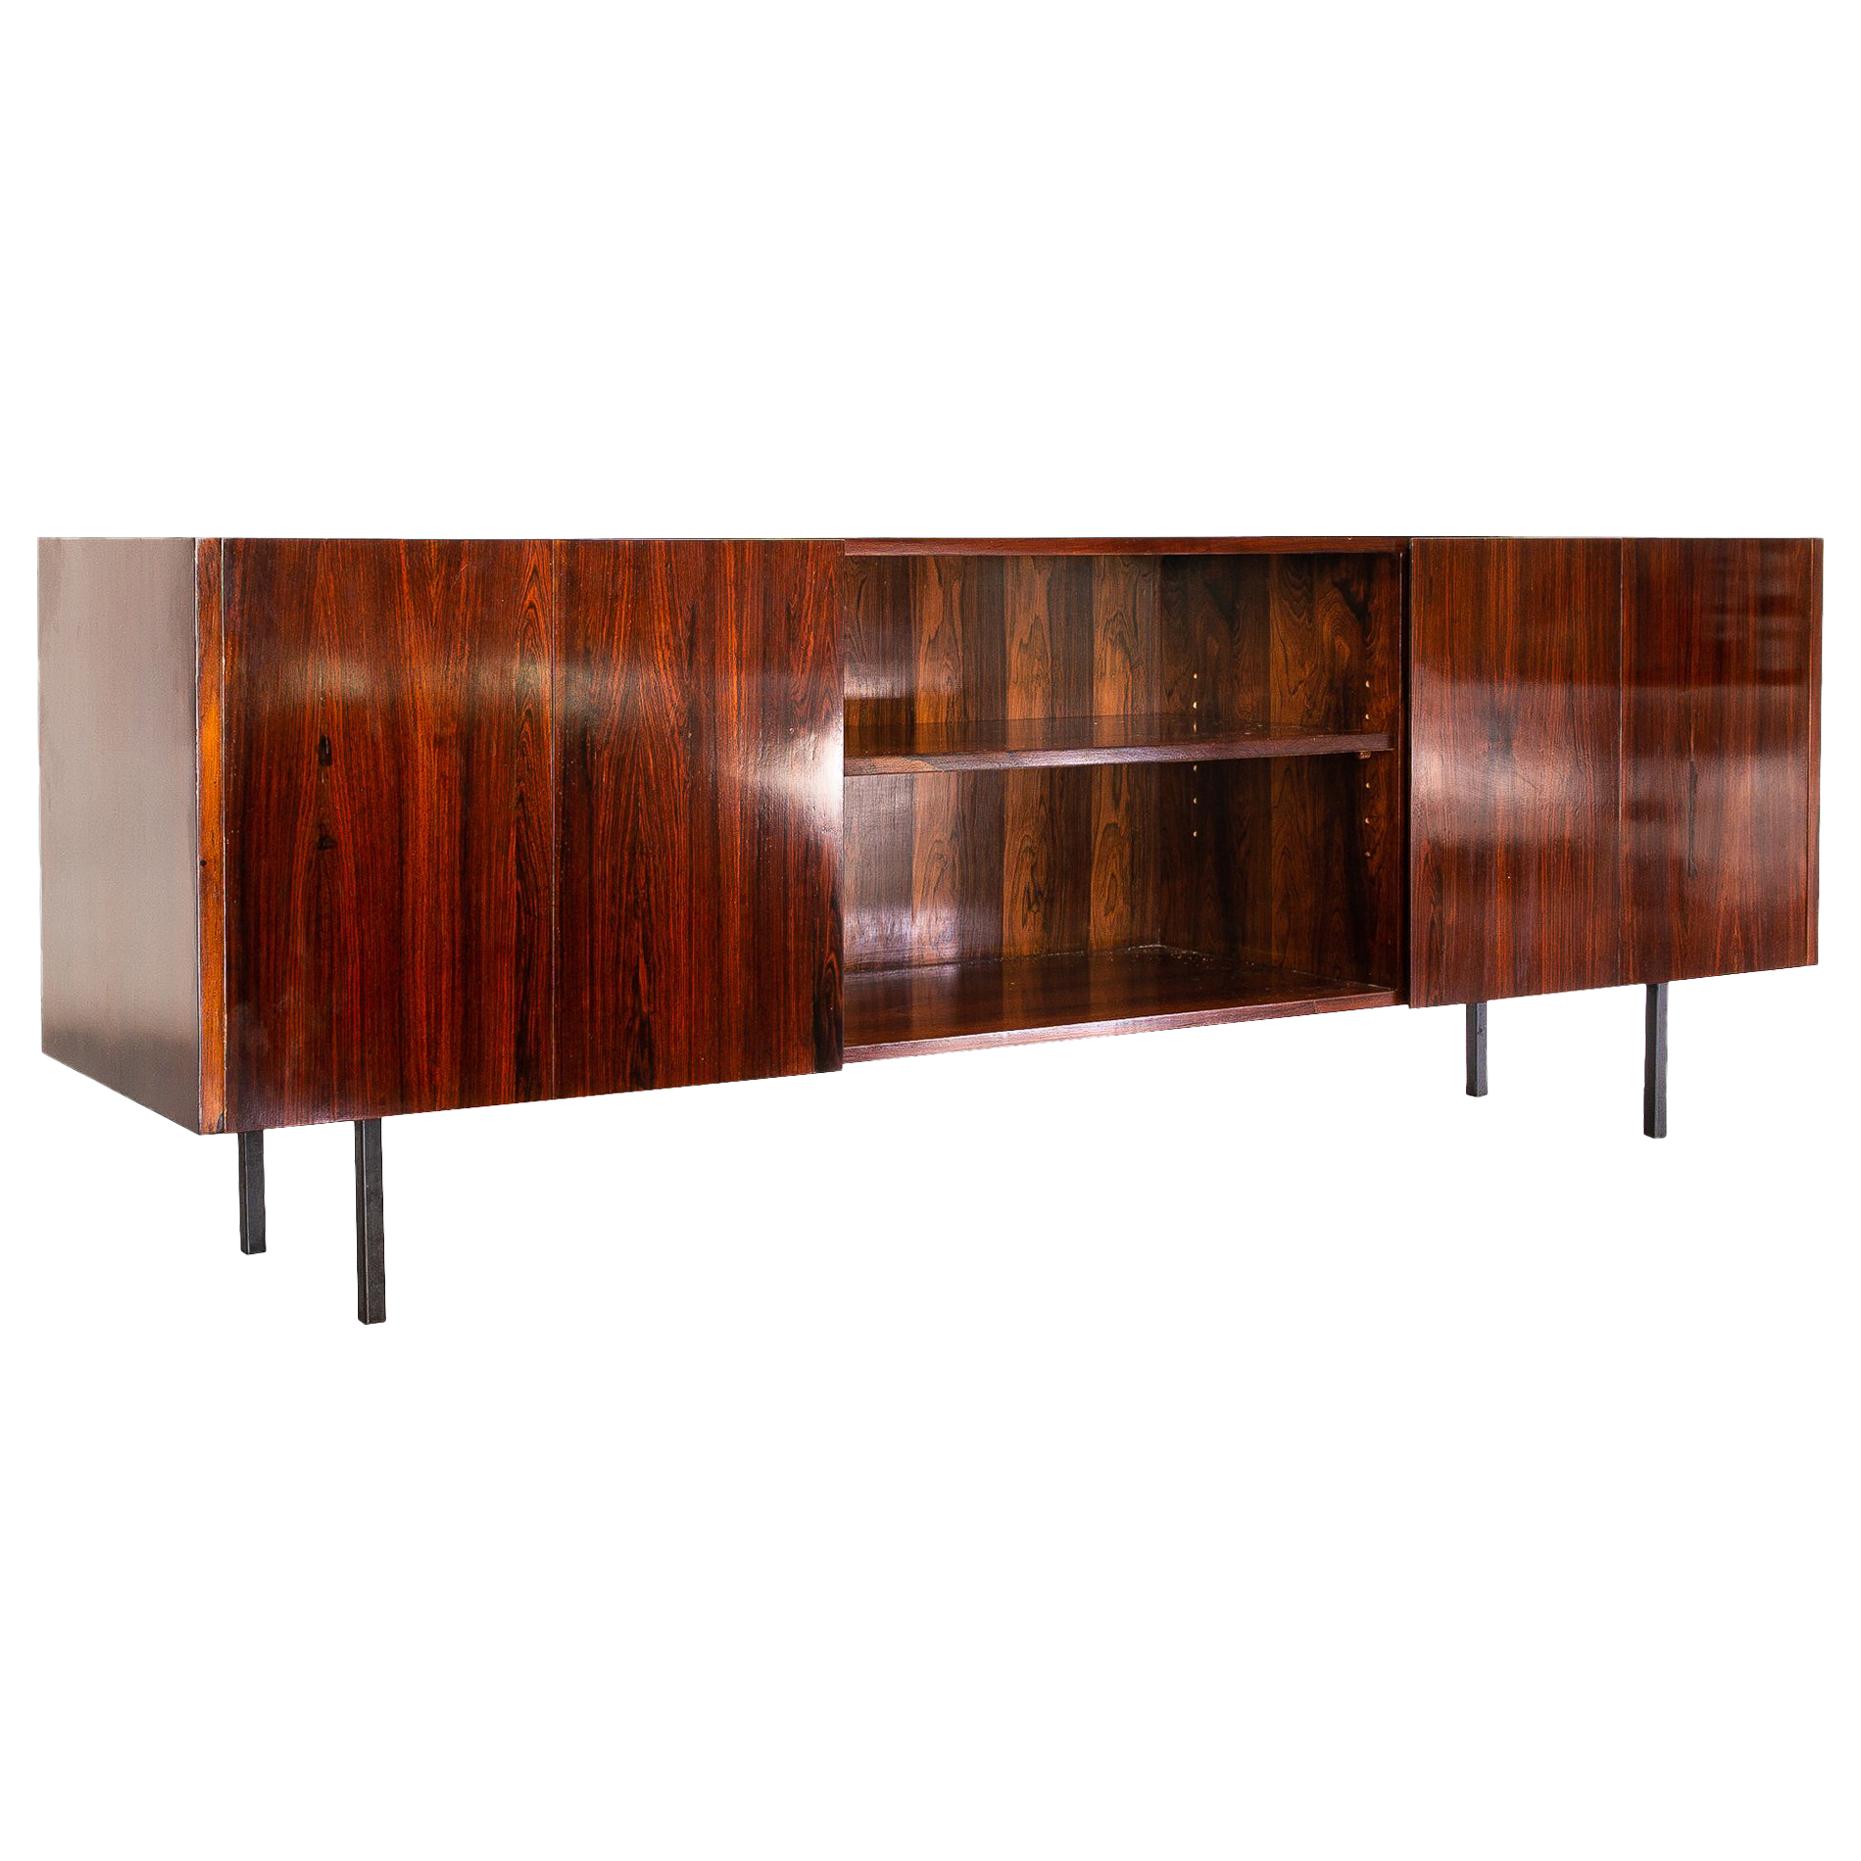 1960s Sideboard in Rosewood and Iron, Designed by Carlo Fongaro, Brazil